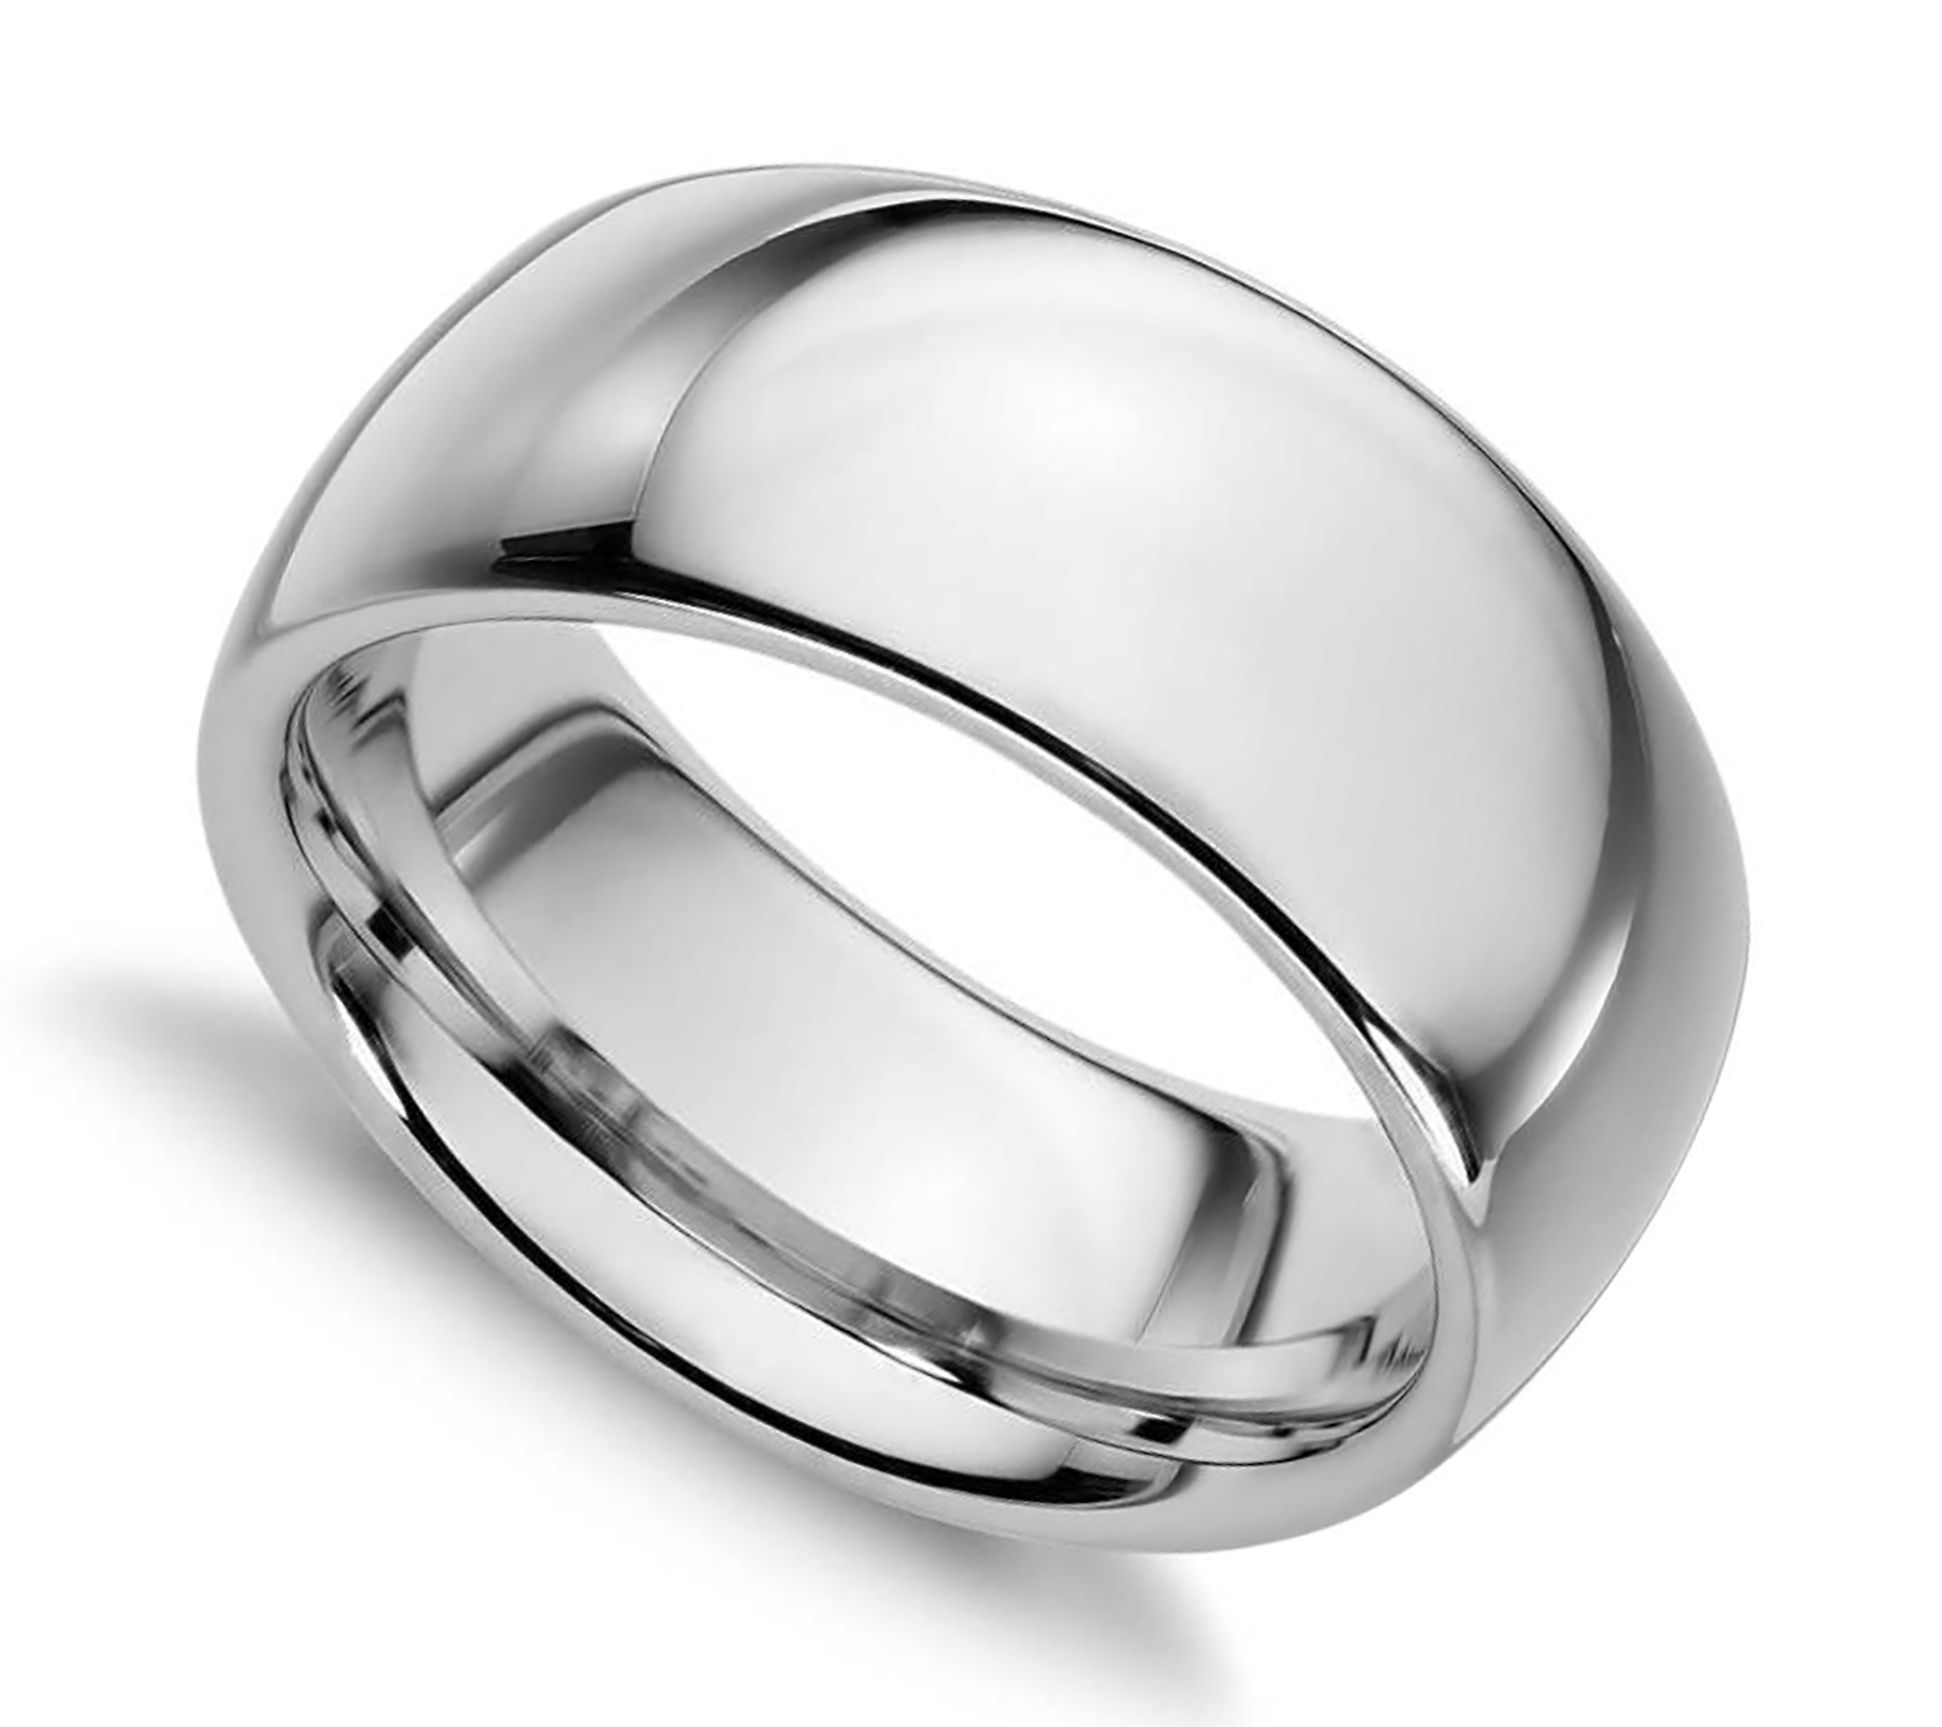 Details about   NEW 10mm Wide Artisan 3g Solid Sterling Silver Feather Wedding Band Ring Size 6 